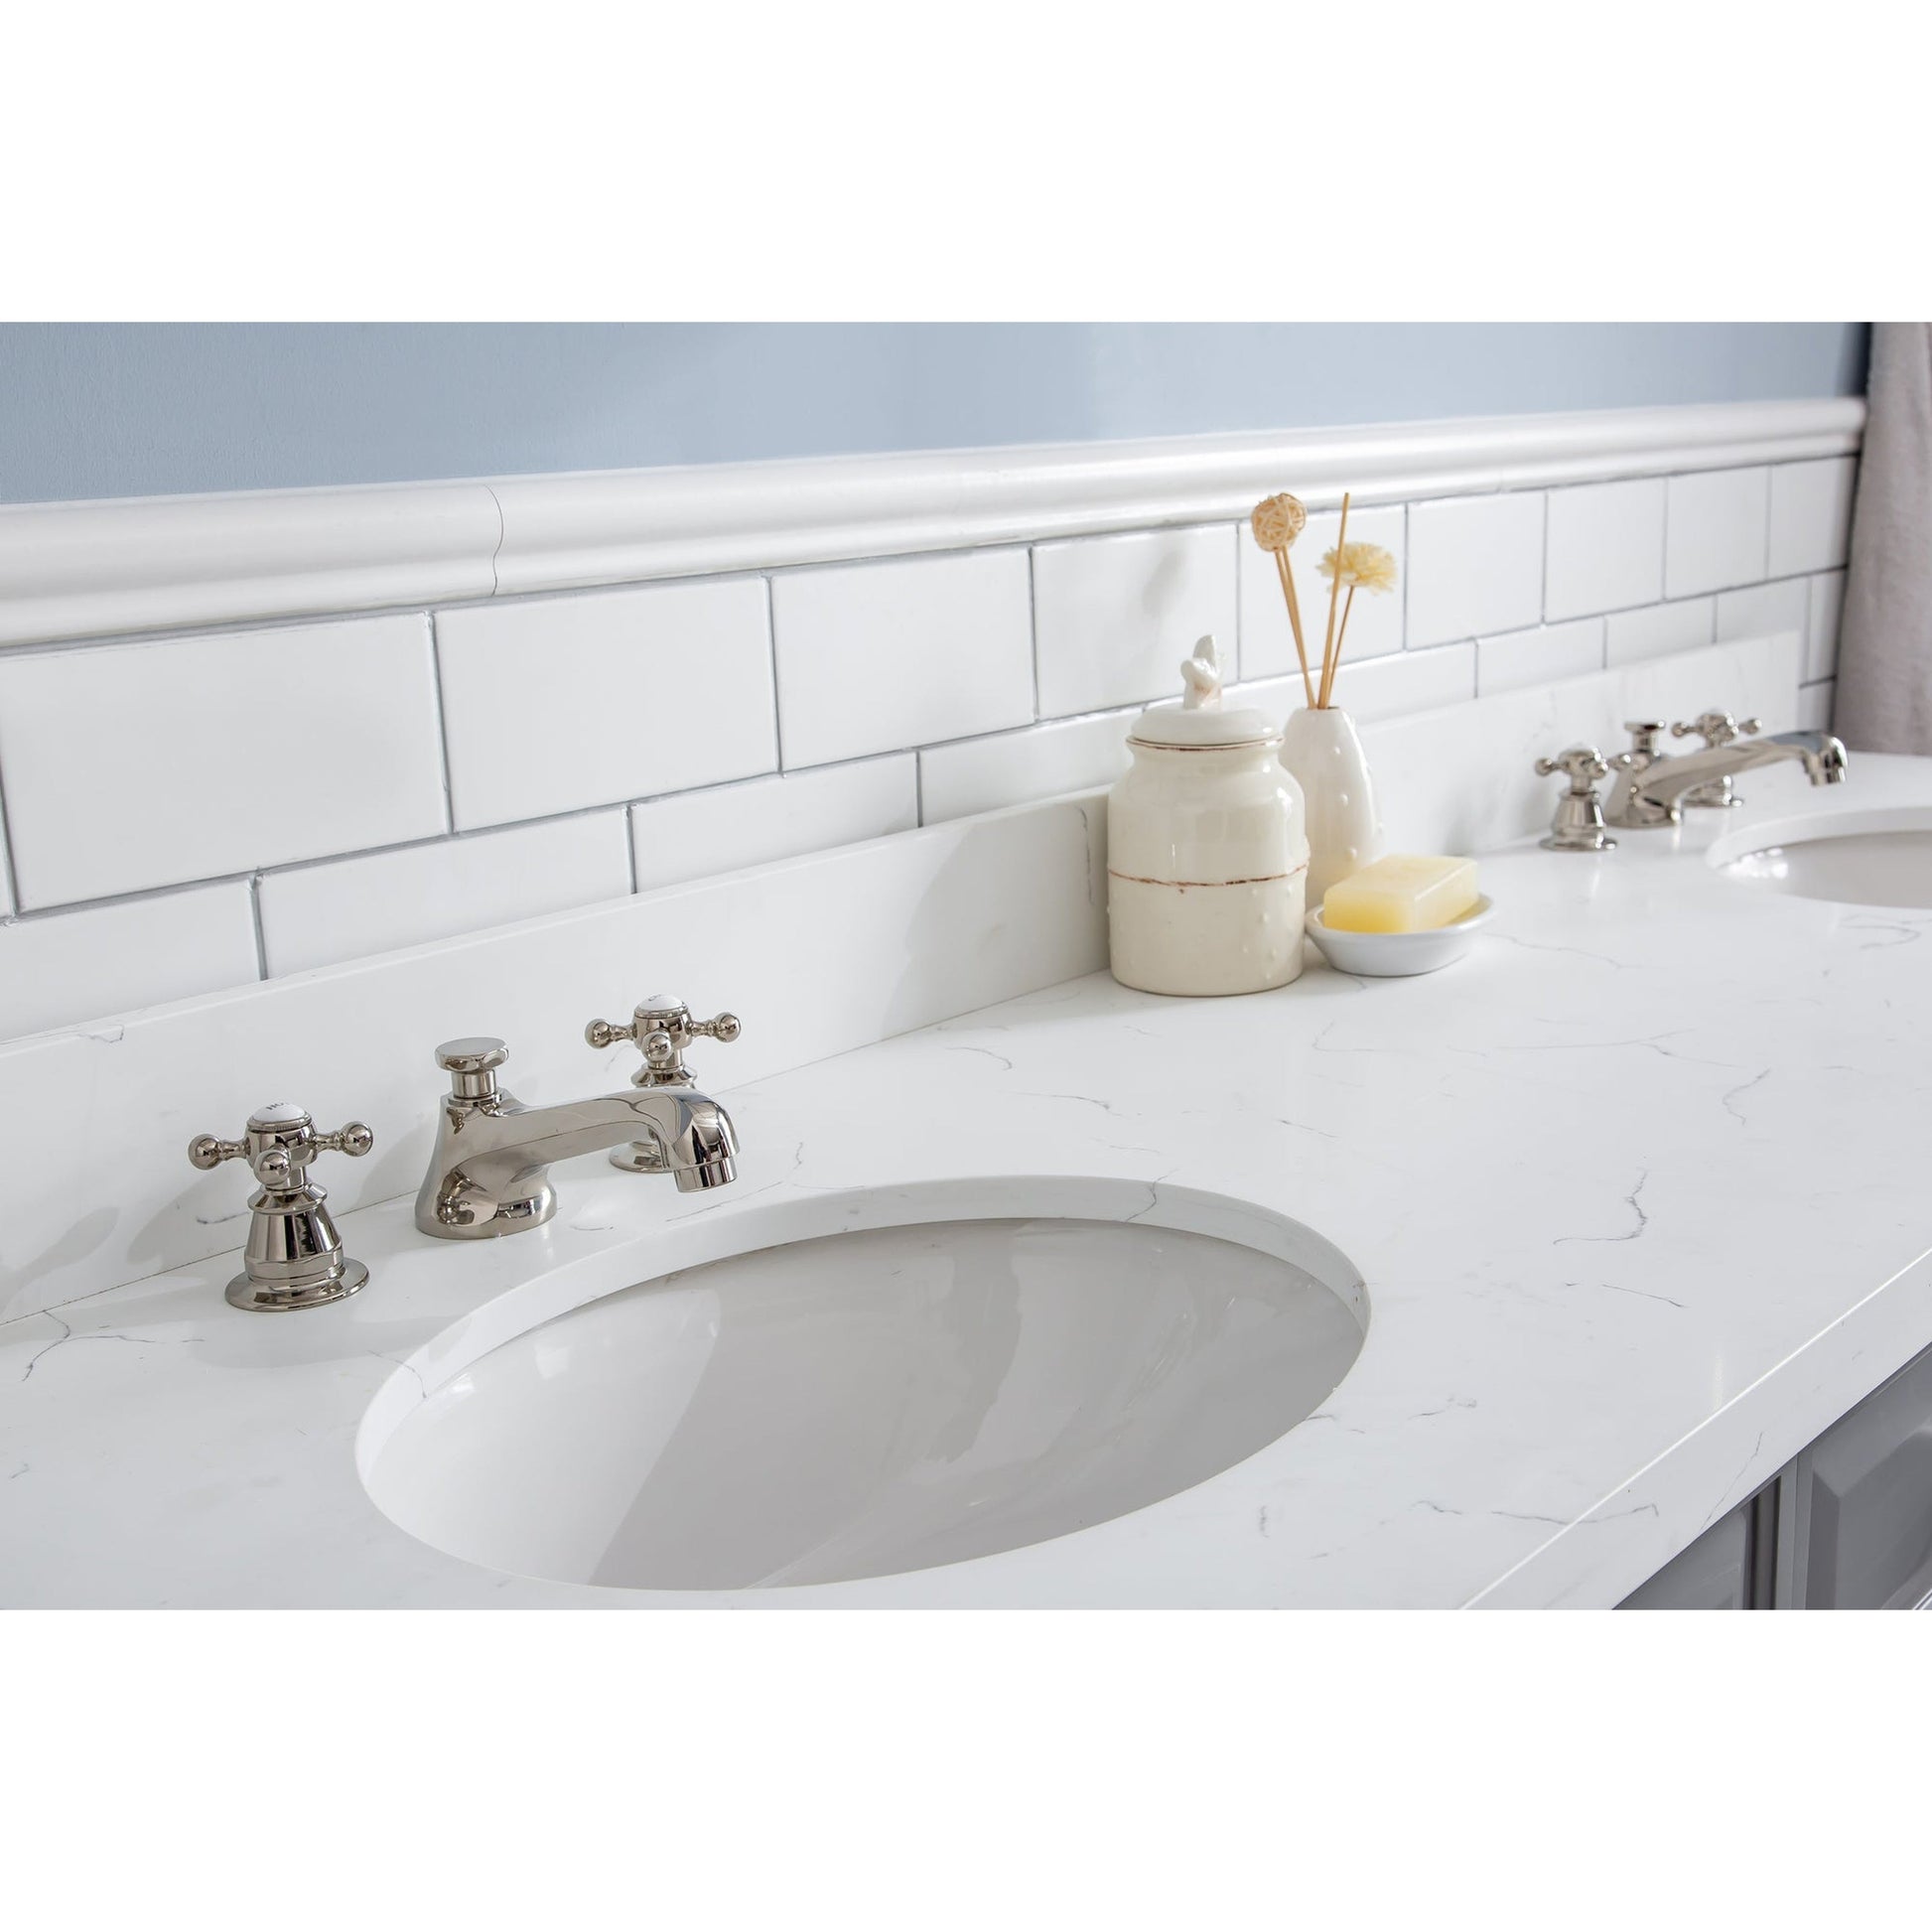 Water Creation Palace 72" Quartz Carrara Cashmere Grey Bathroom Vanity Set With Hardware And F2-0009 Faucets in Polished Nickel (PVD) Finish